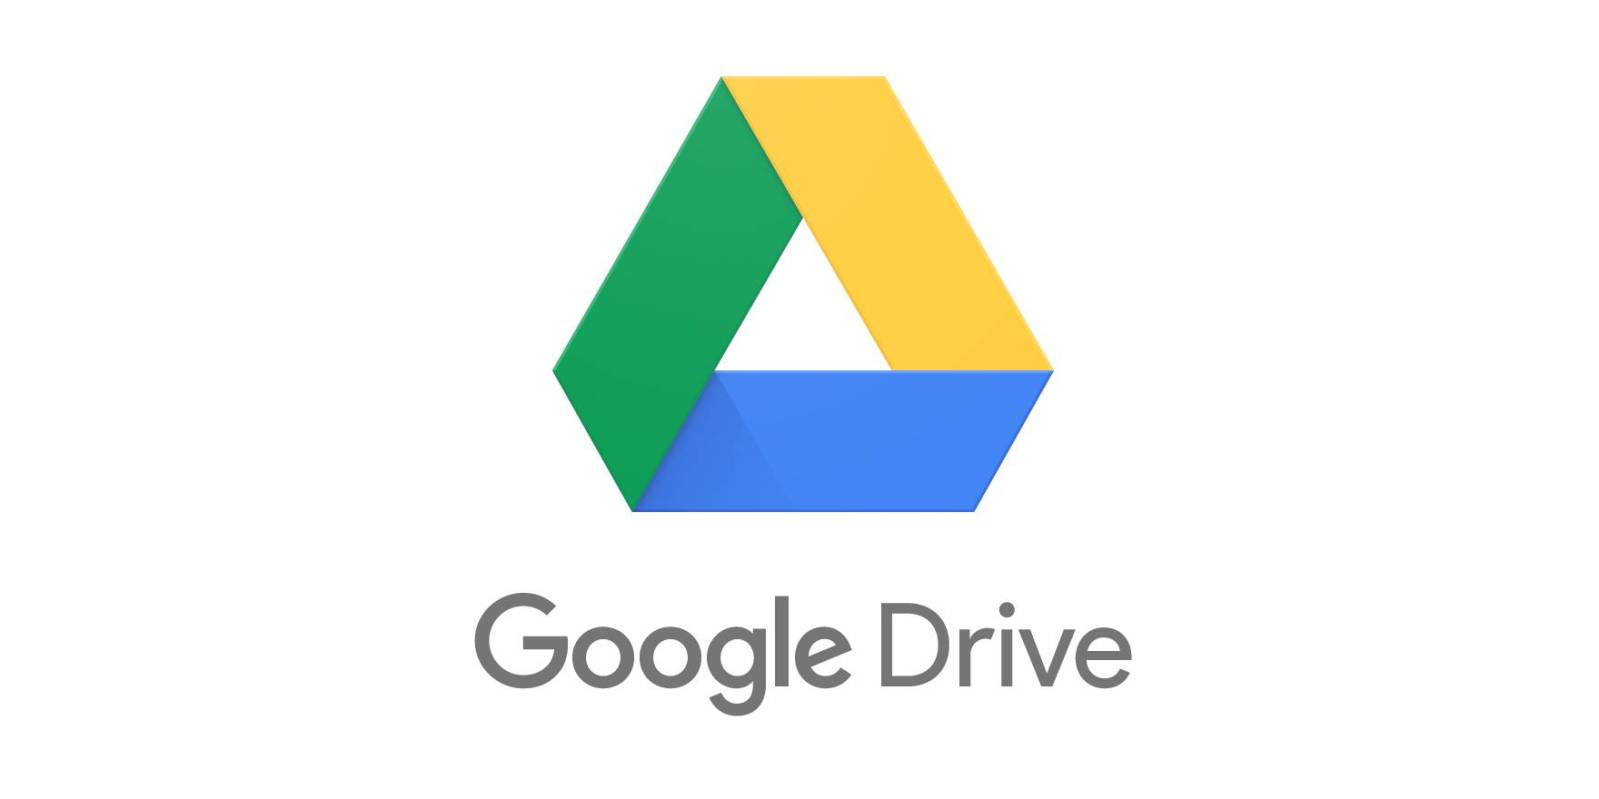 How To Use Google Drive’s New Research Tool